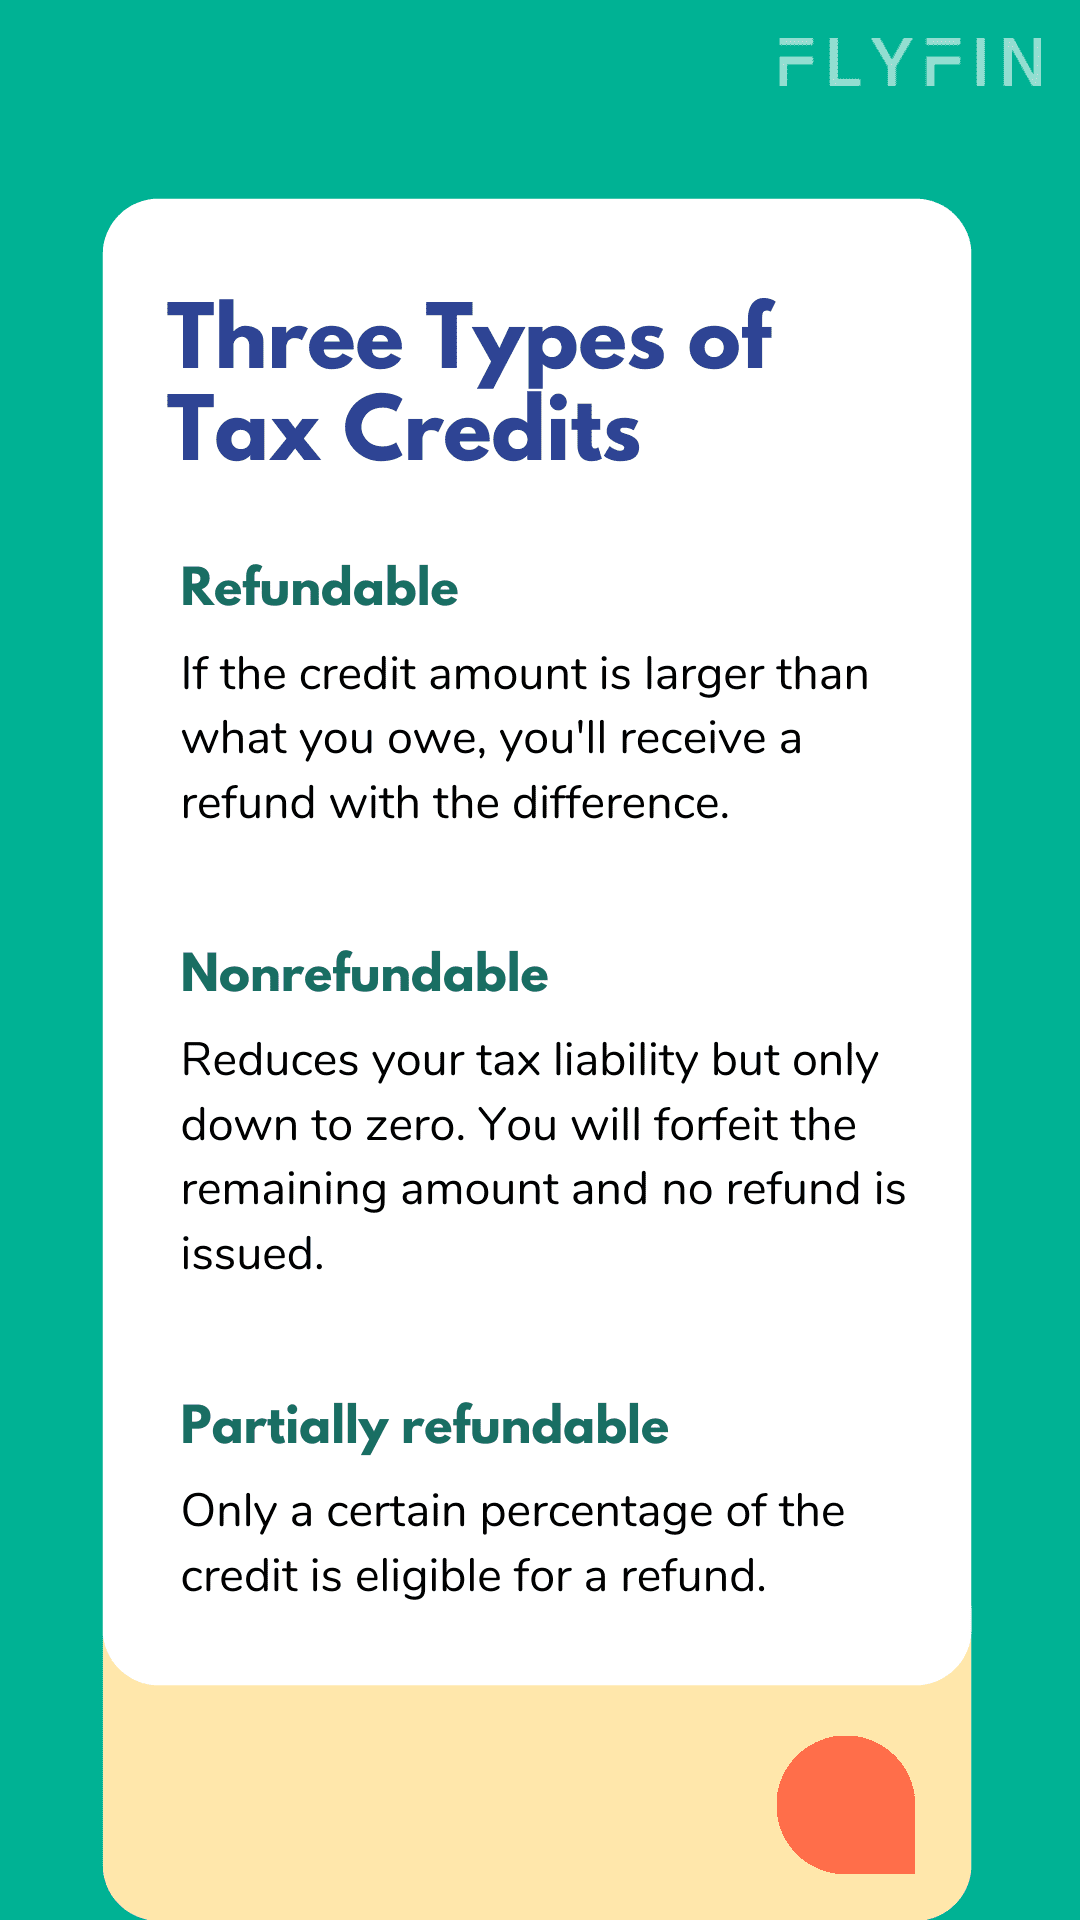 Image describing three types of tax credits - refundable, partially refundable and nonrefundable. Refundable credits give a refund if credit amount is larger than owed taxes. Nonrefundable credits only reduce tax liability to zero. No refund is issued for partially refundable credits.